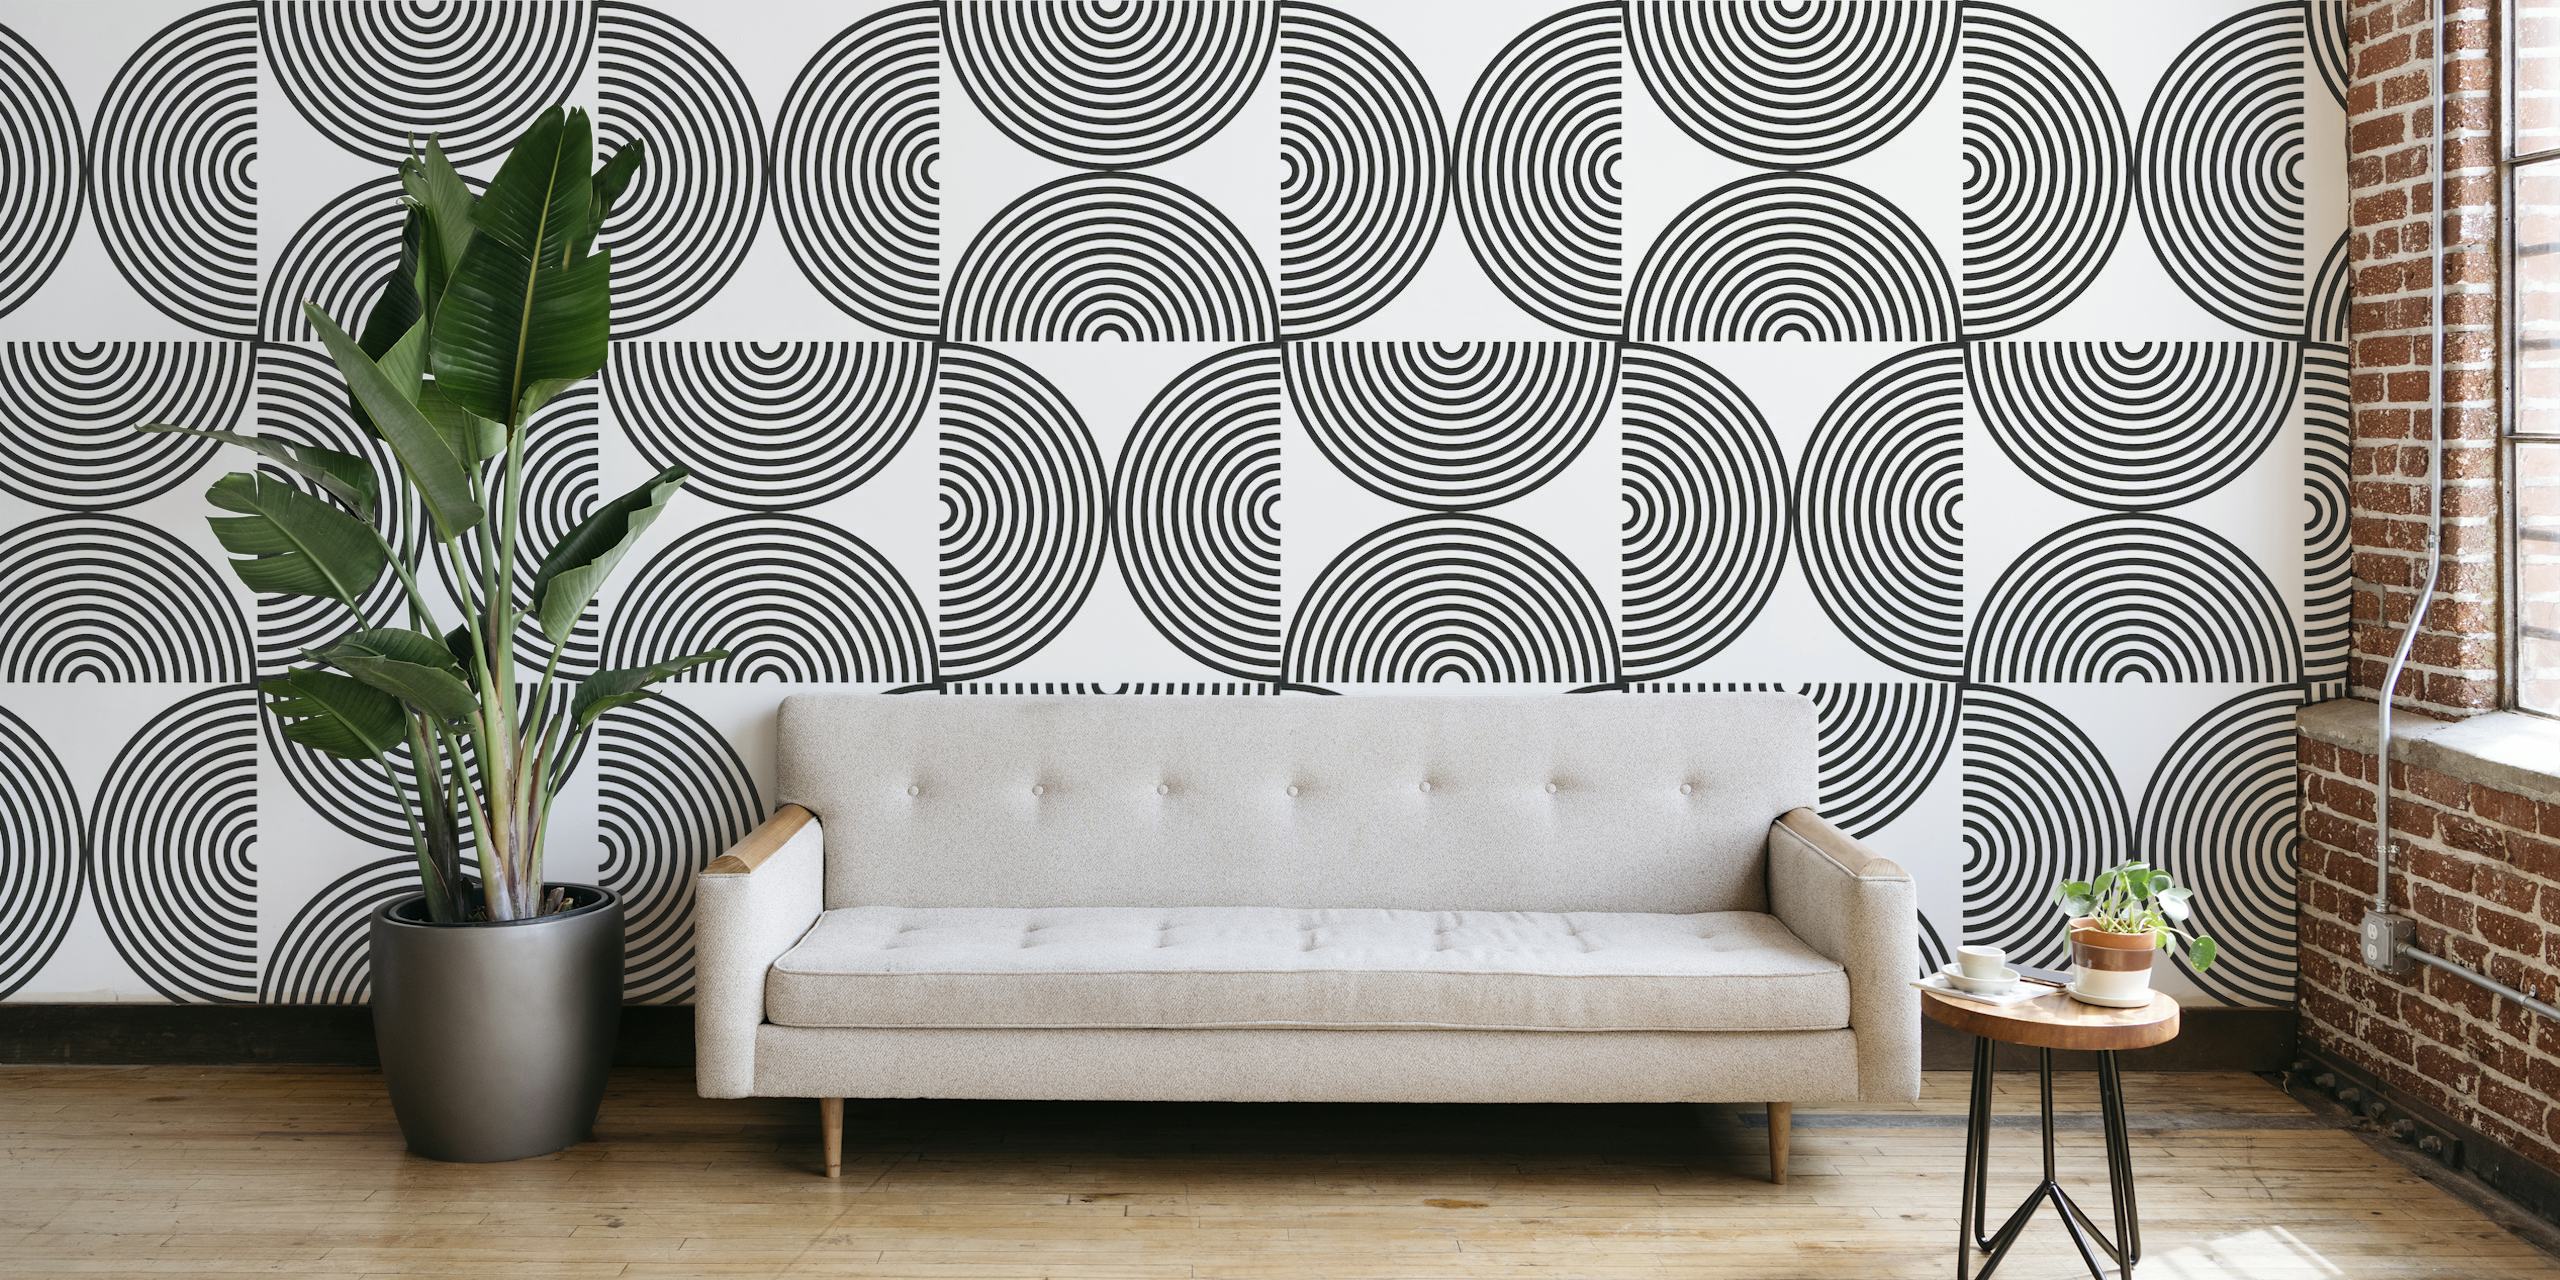 Geometric lines and circles pattern wall mural in grayscale